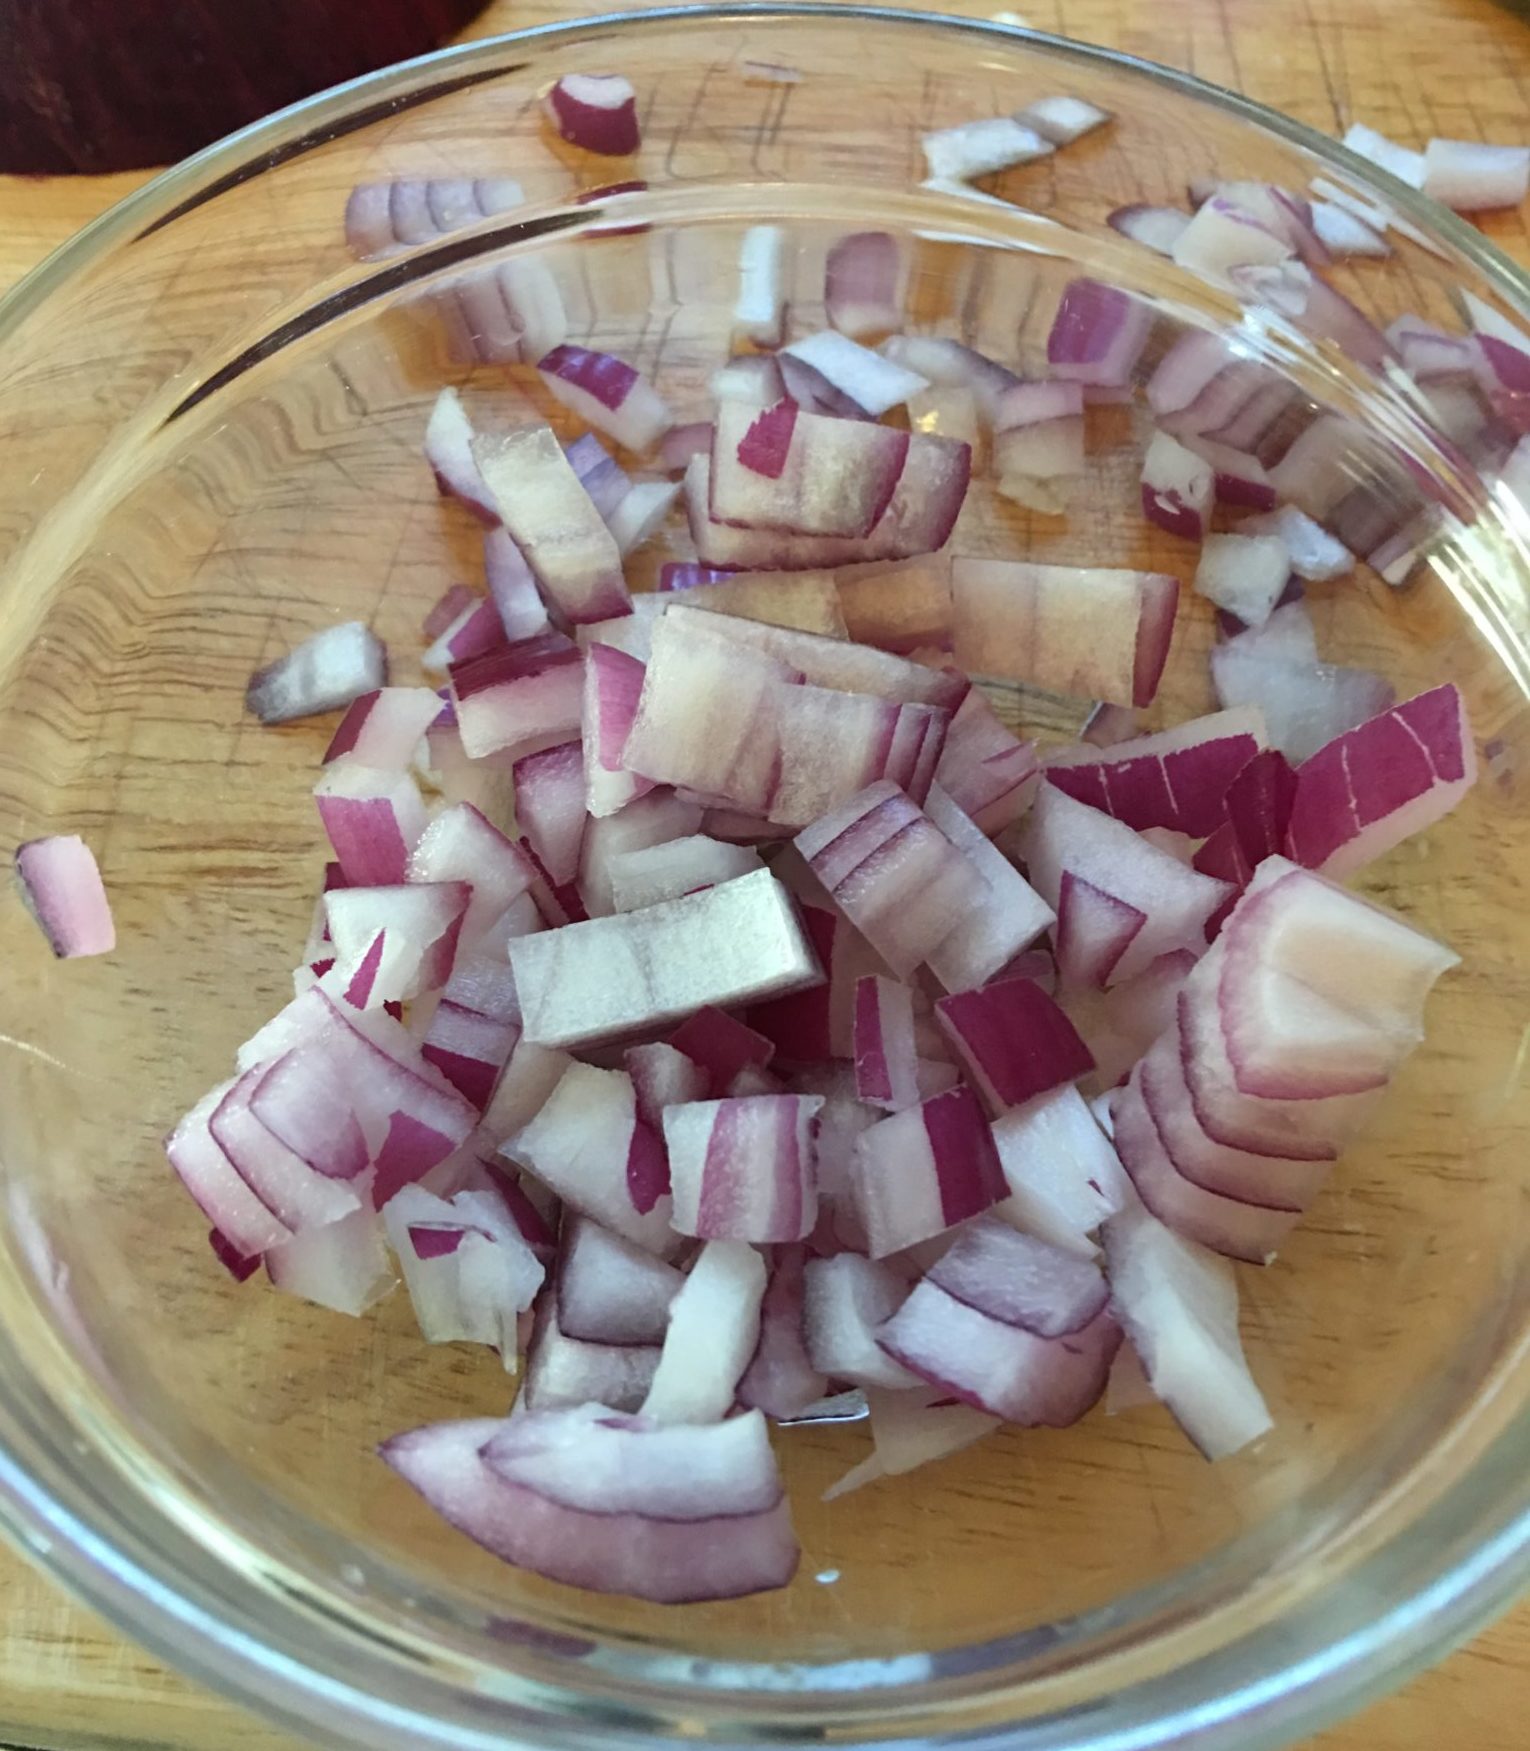 Red onion, diced